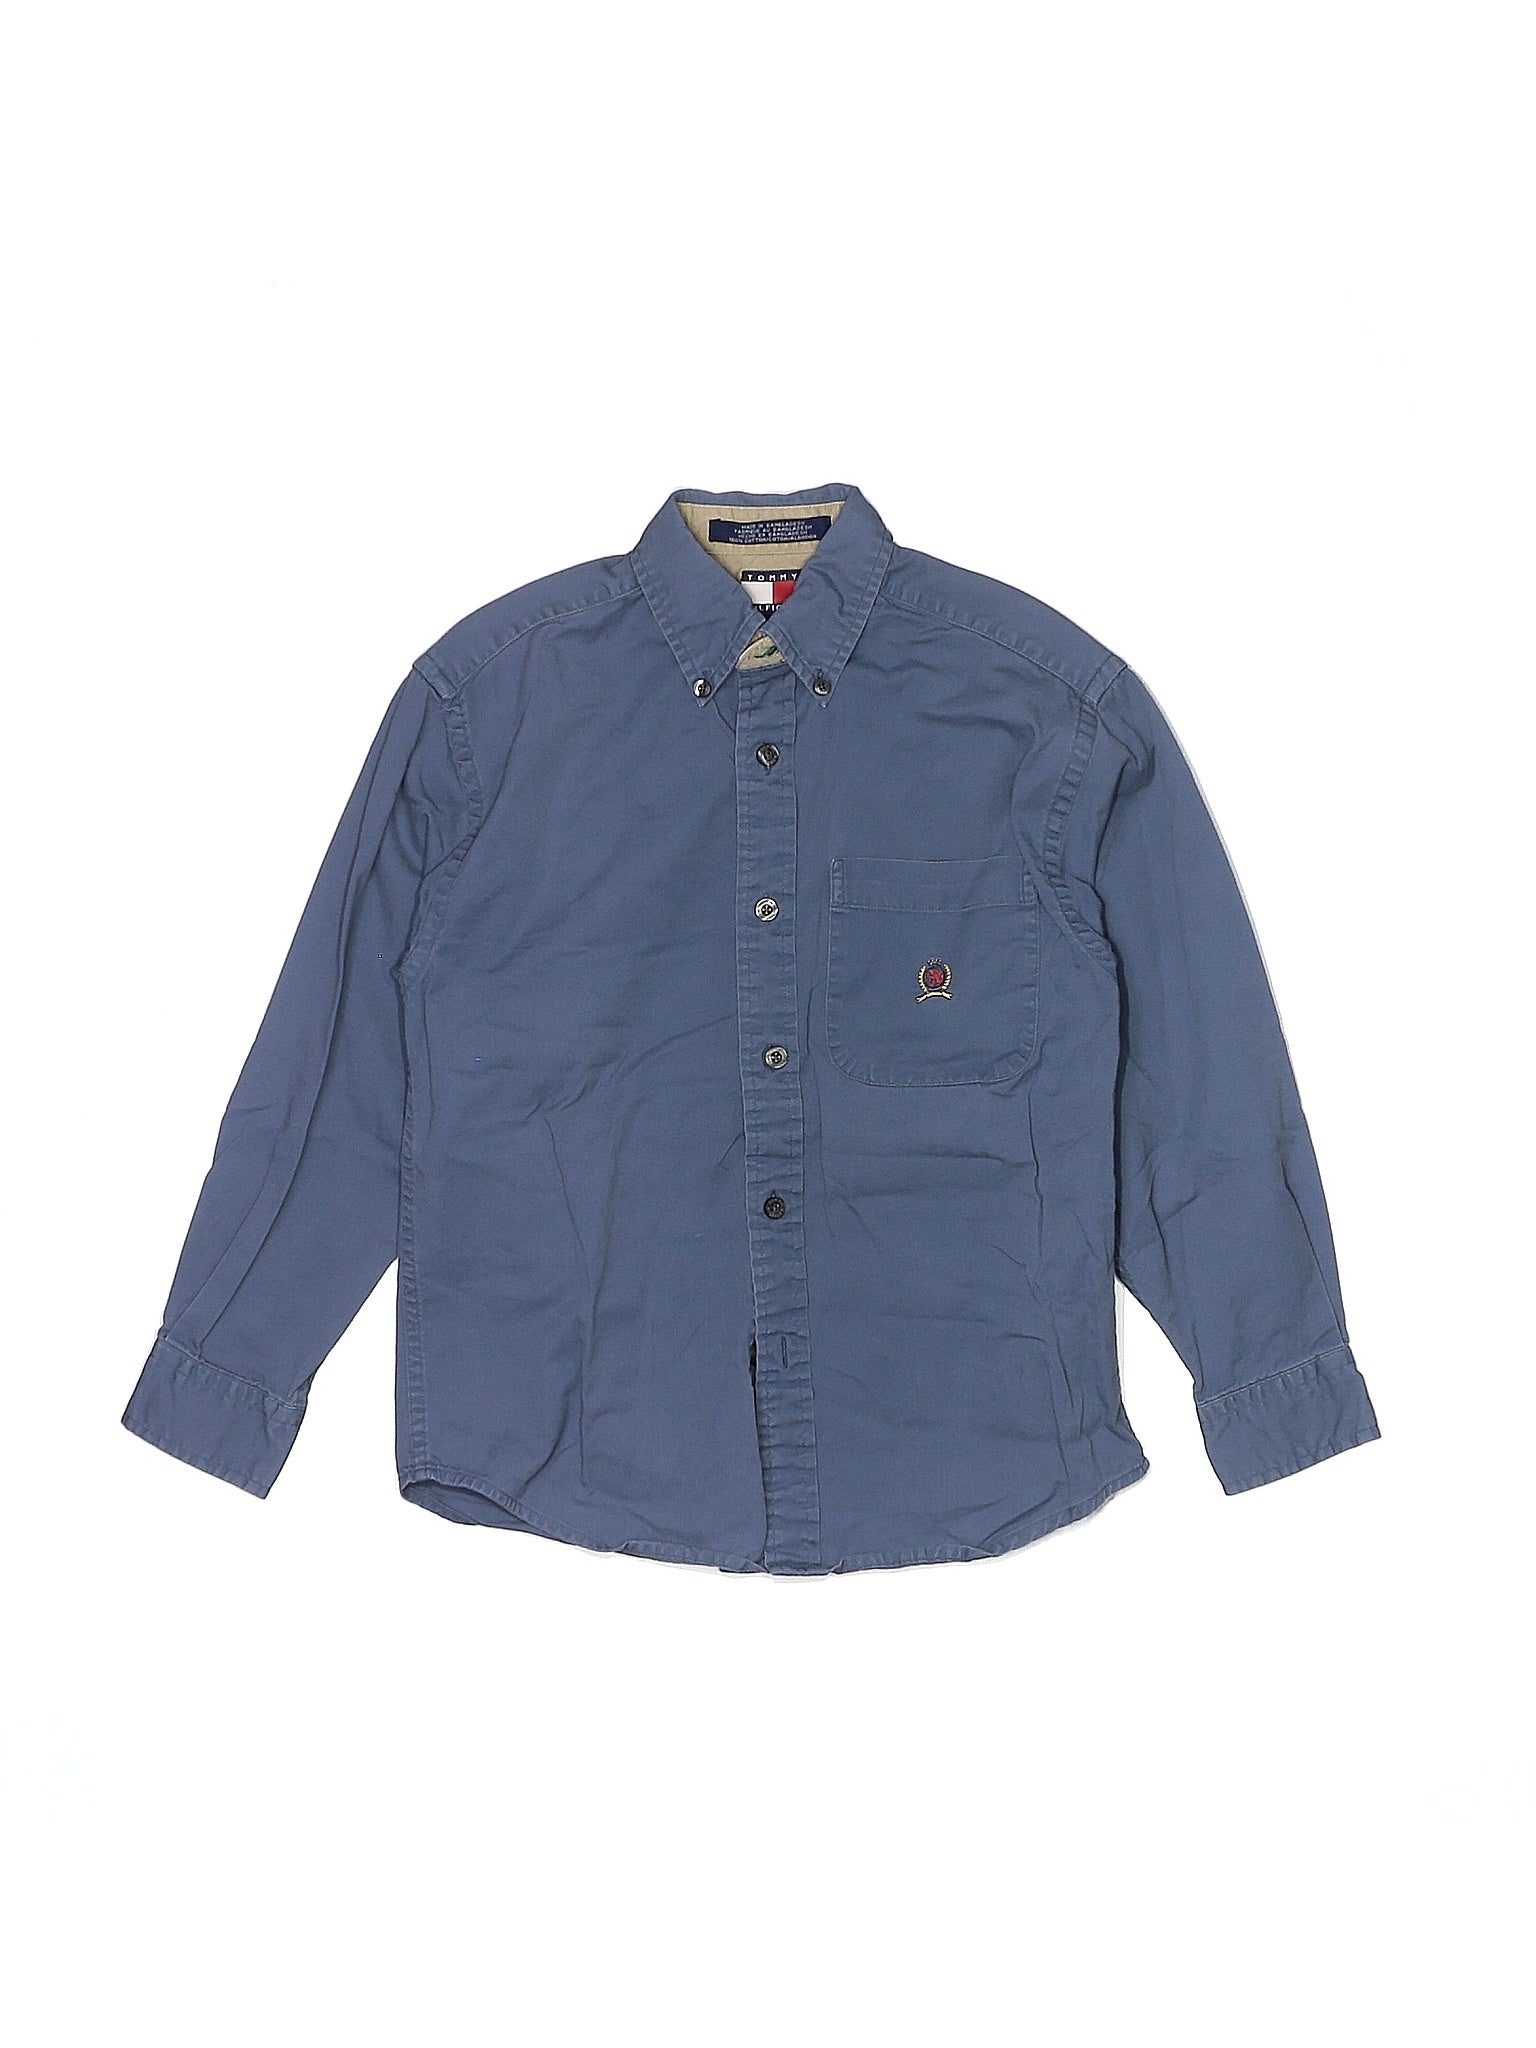 Long Sleeve Button Down Shirt size - S (Youth)